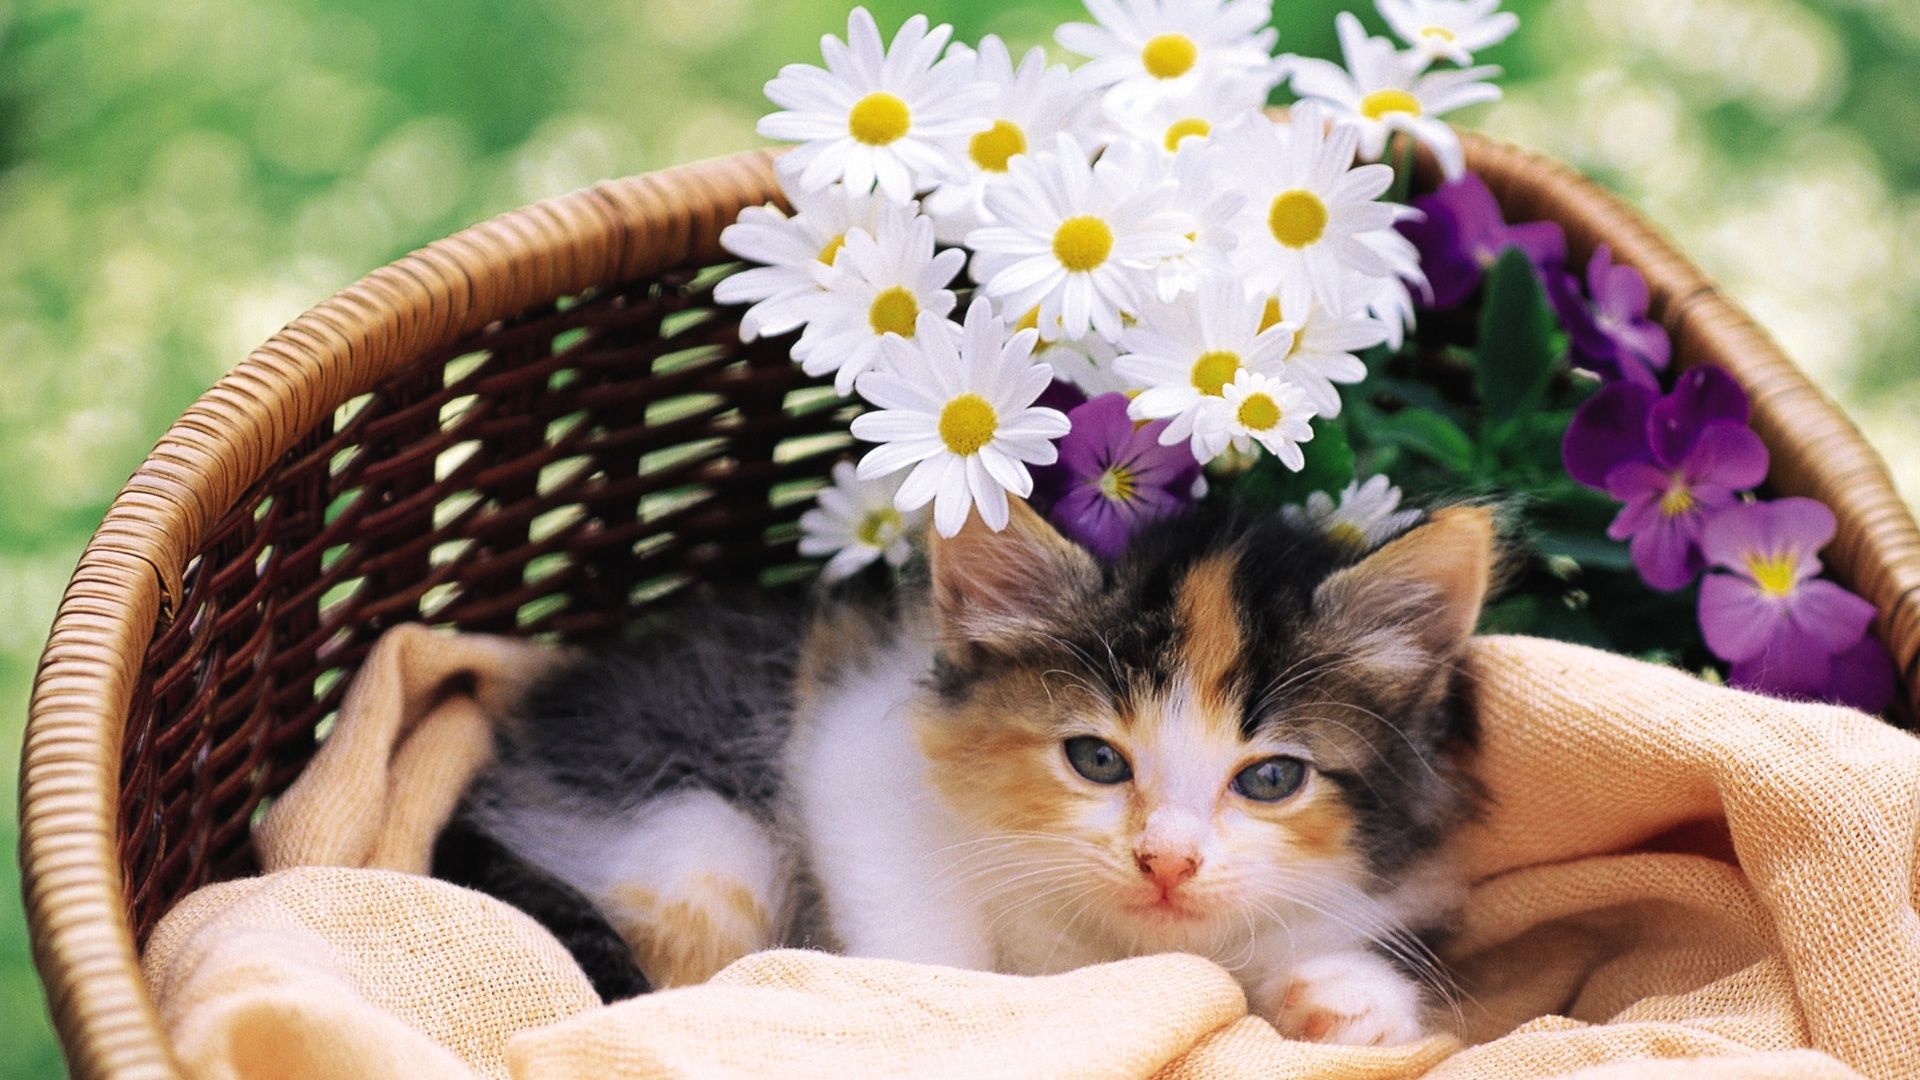 Cat And Flower In Basket With Flowers